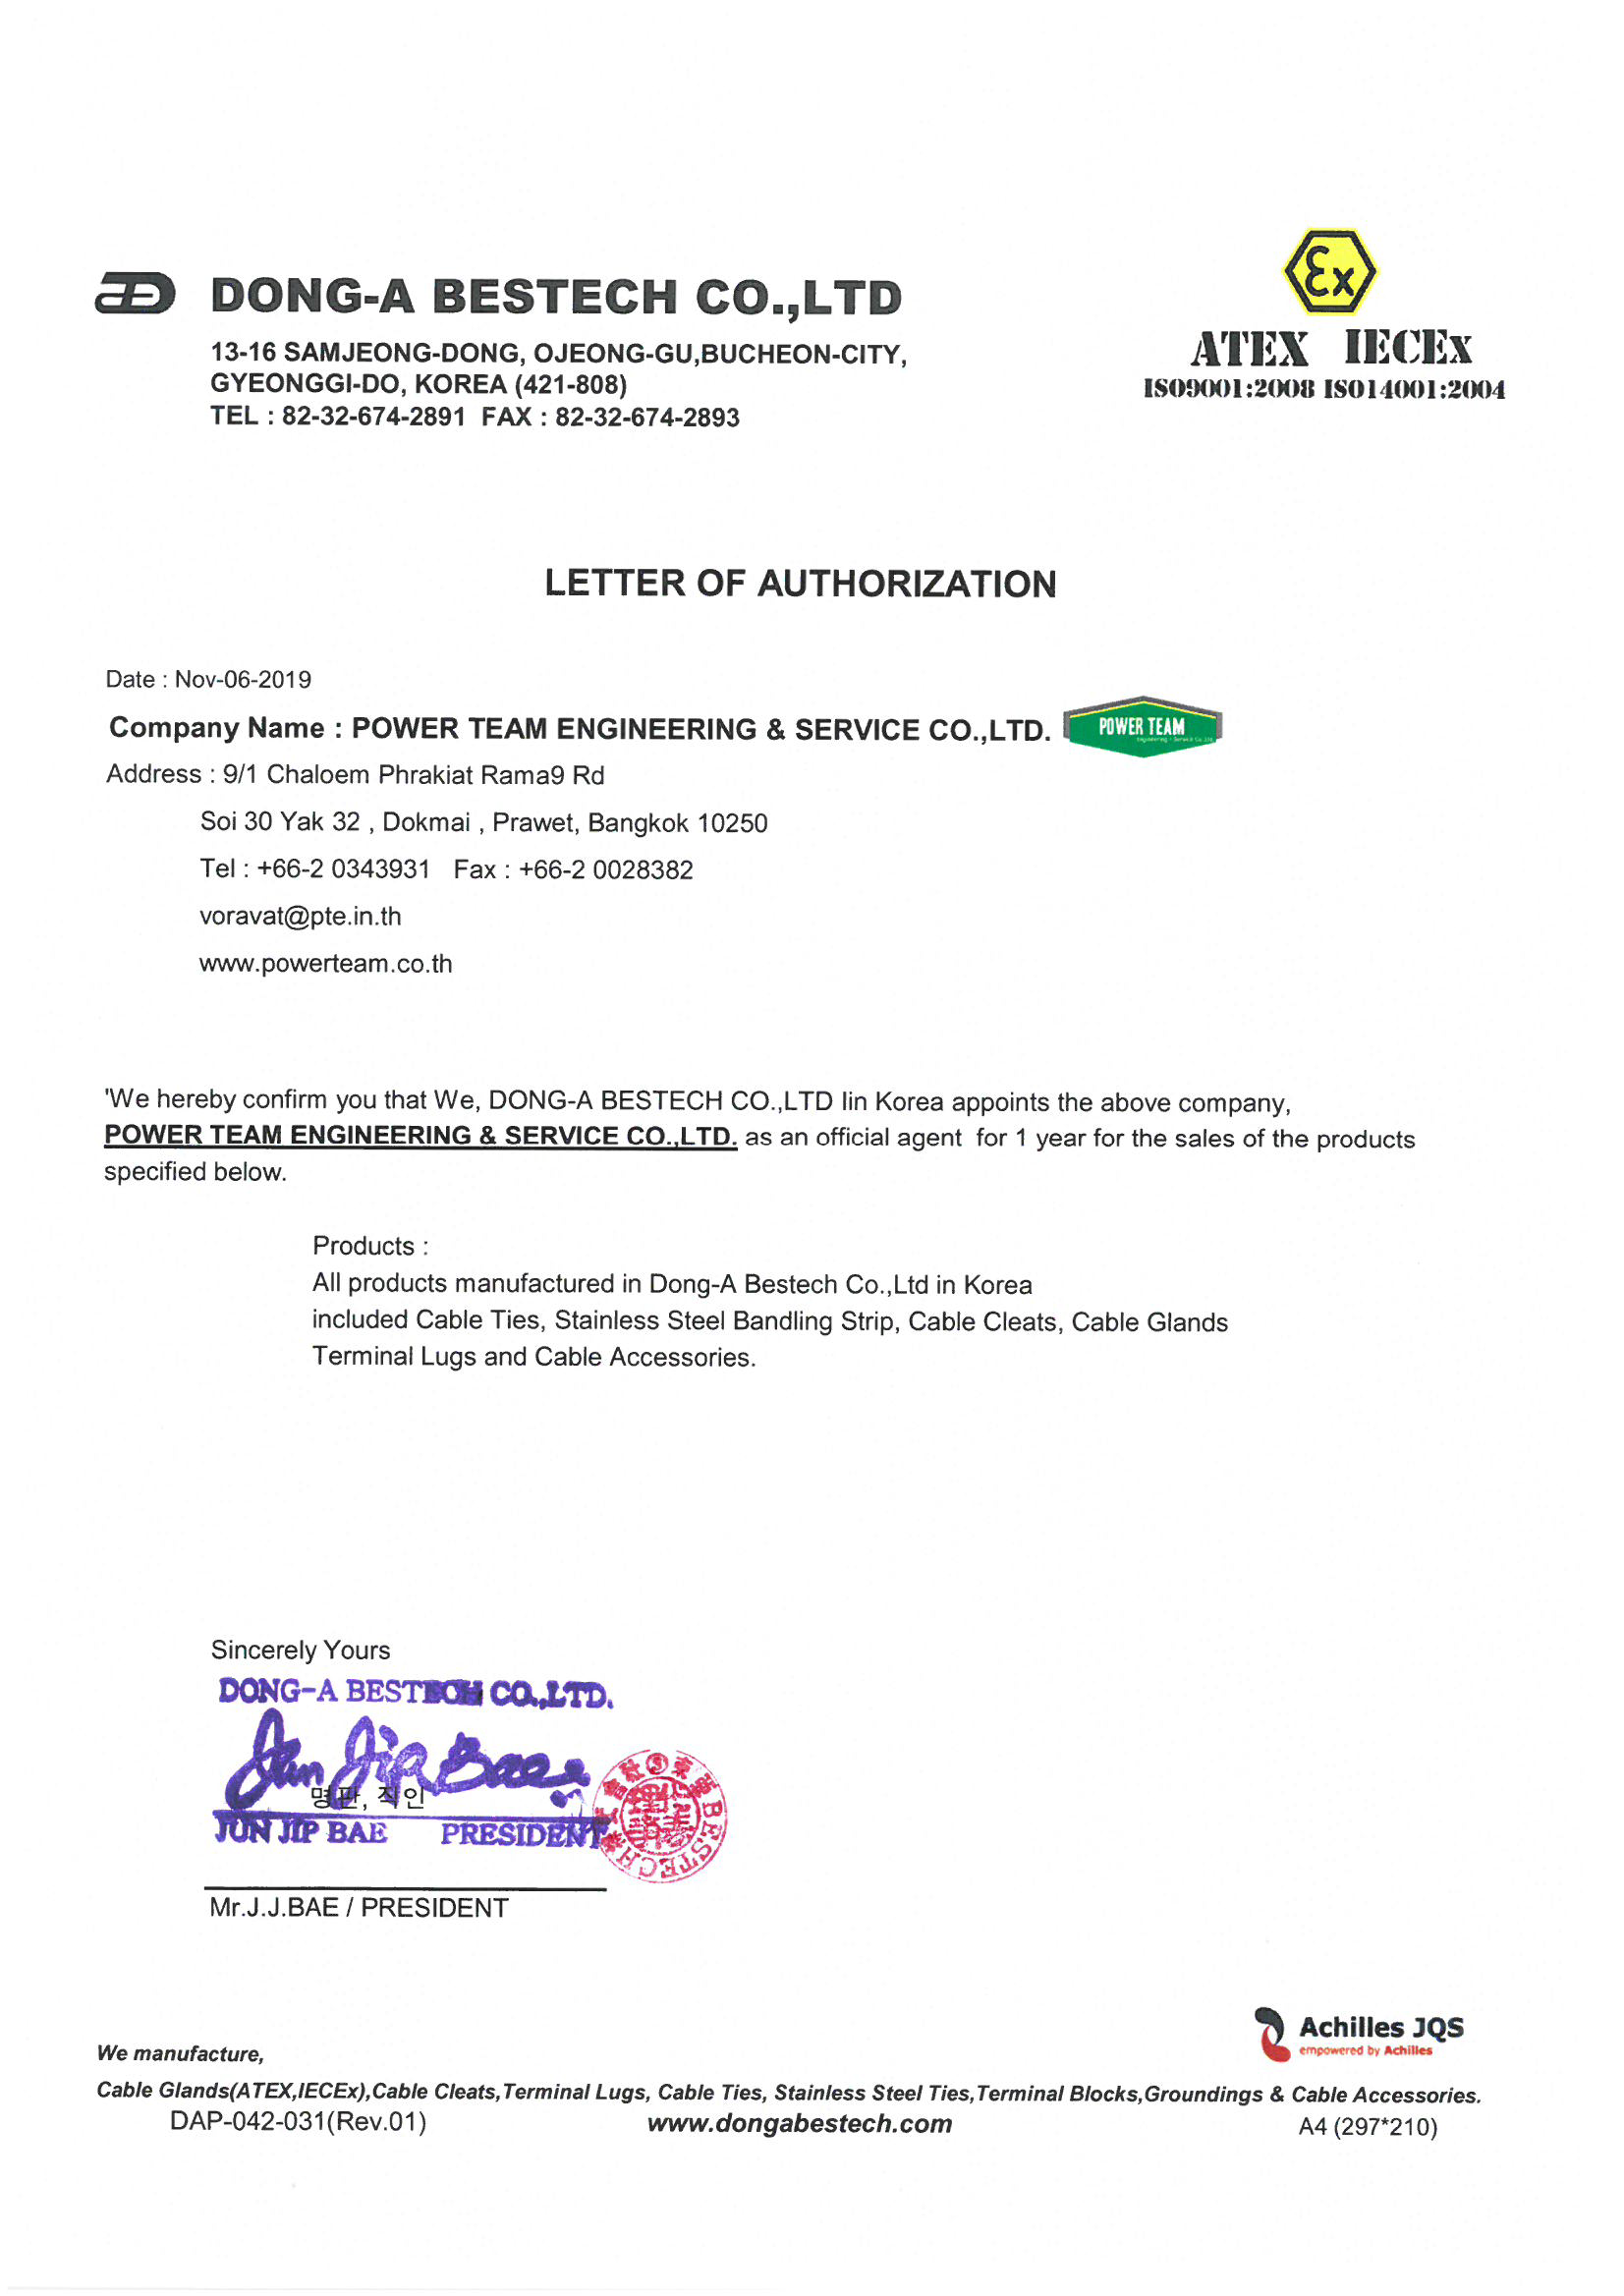 Letter of Authorization 1Y